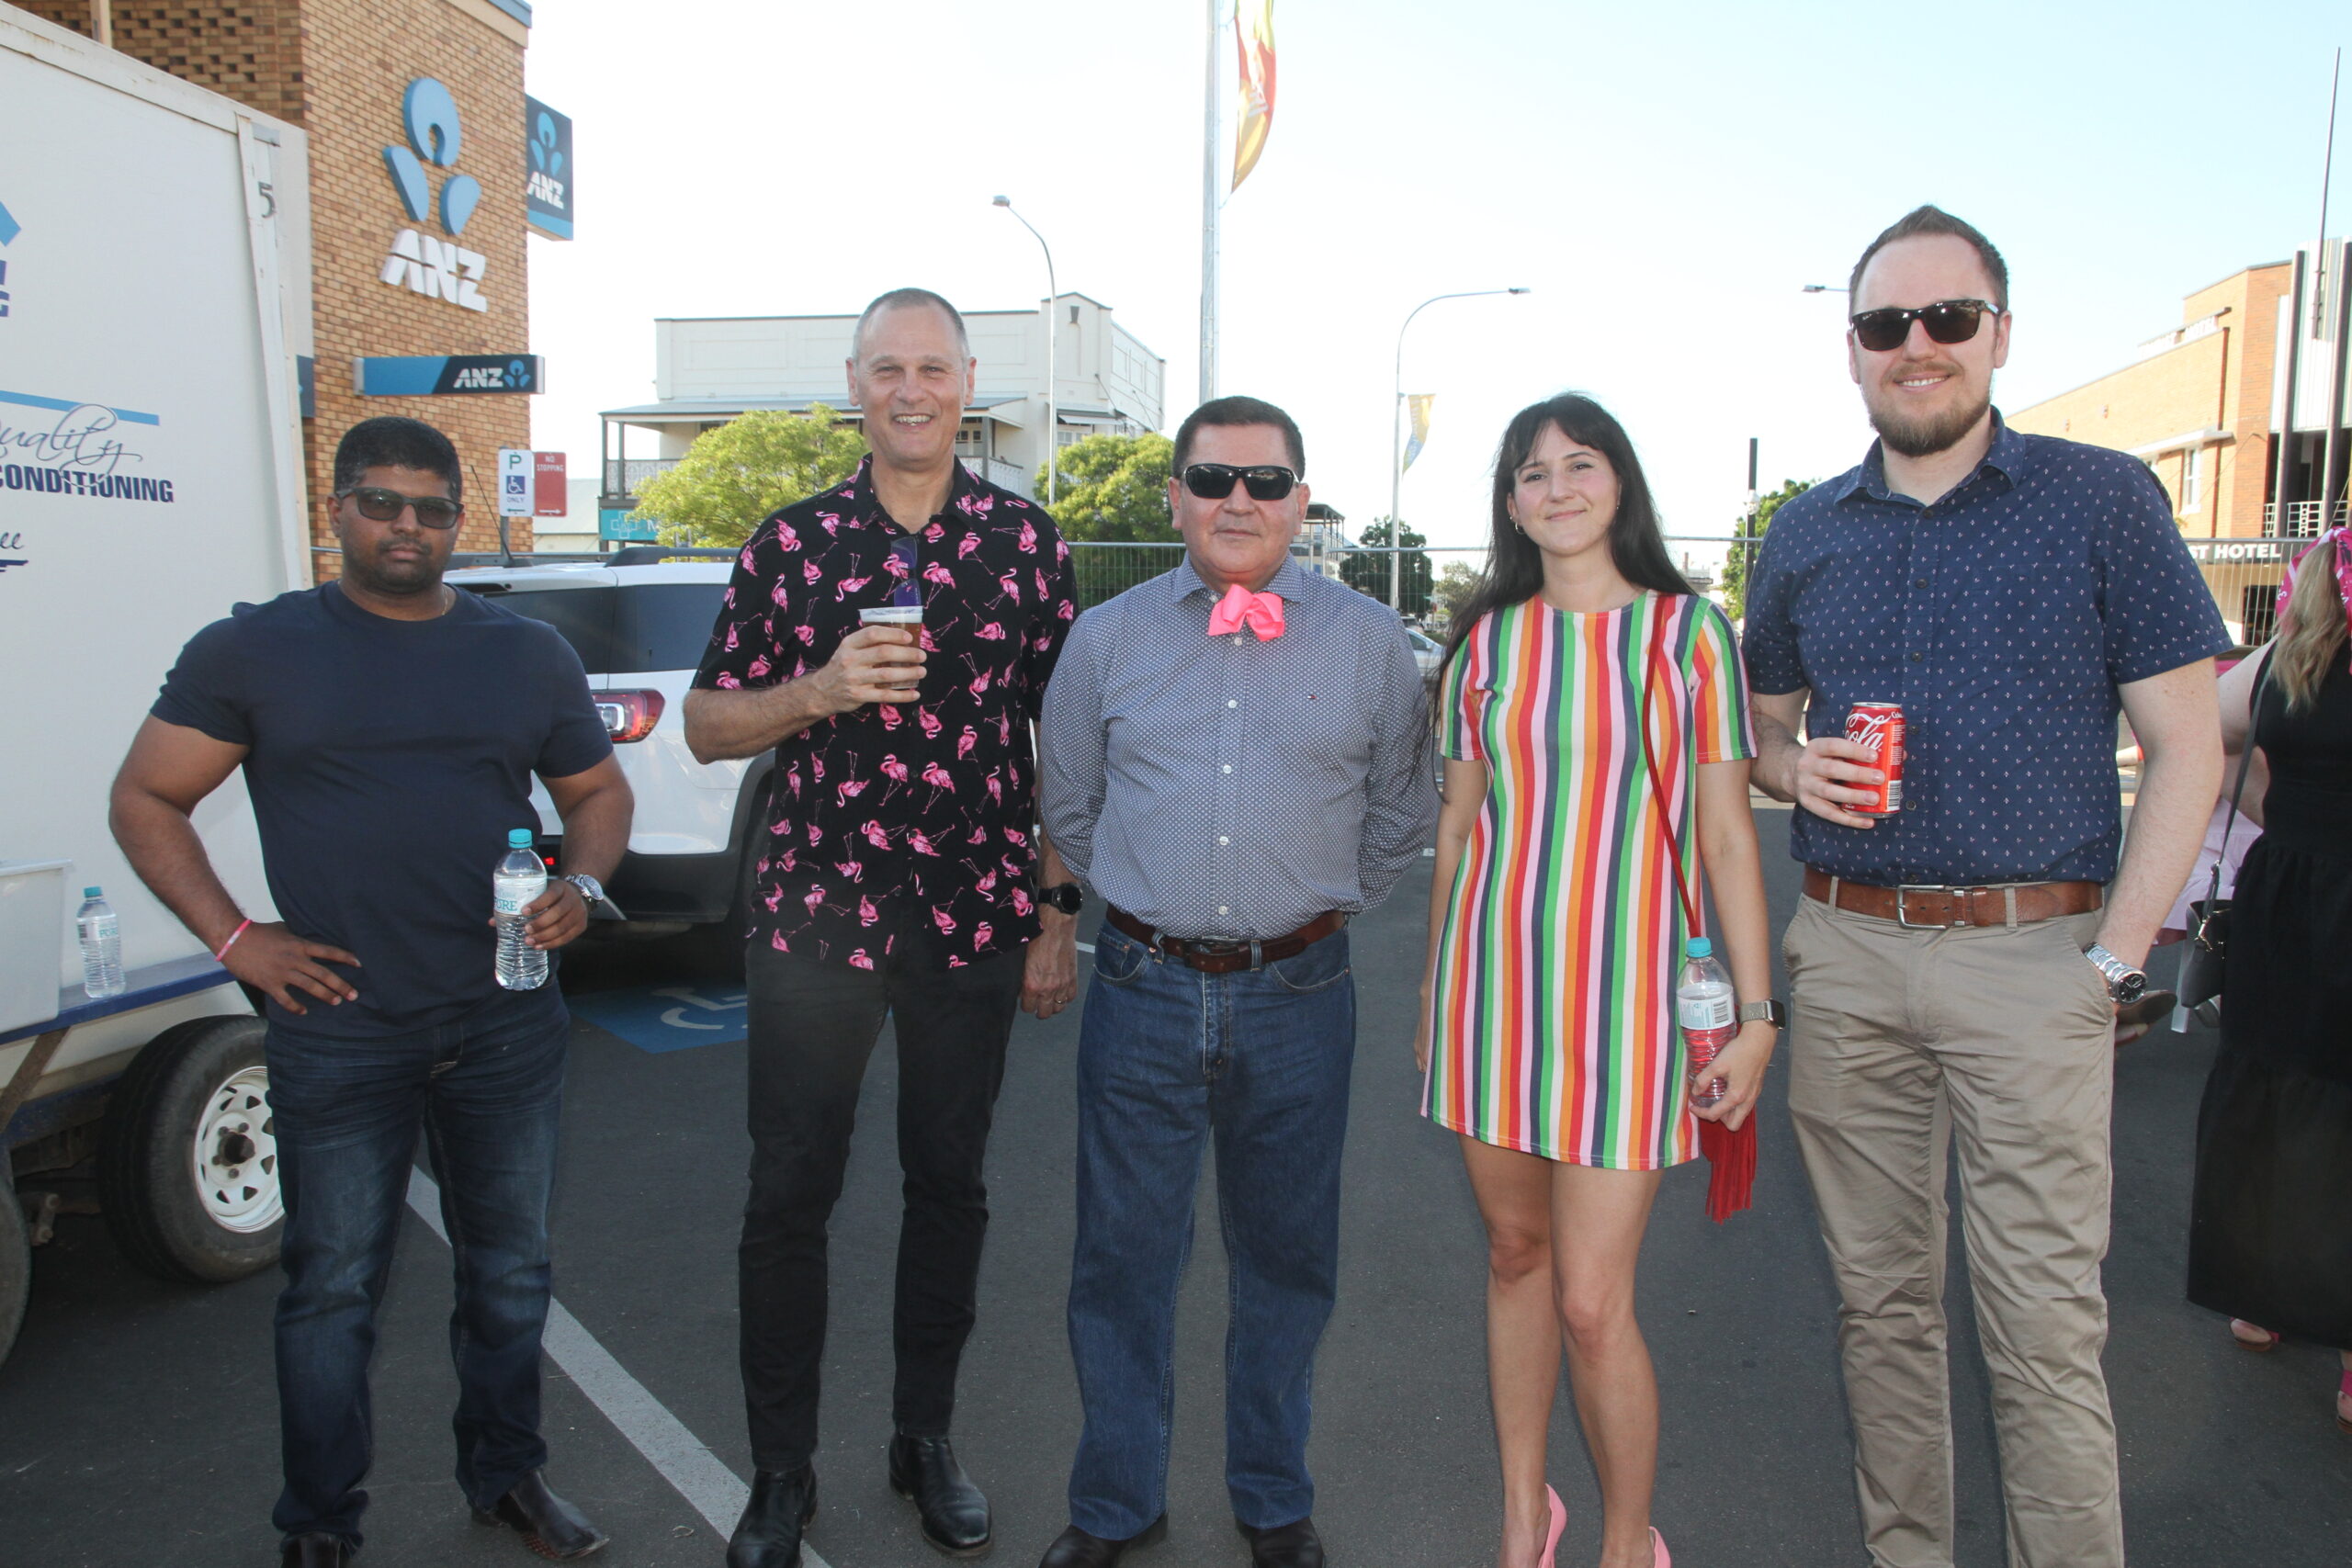 Staff from Maules Creek (Whitehaven) at the dinner were Pavan Gajula, Paul Antich, Jorge Moraga and Natalia and Mark Racz.